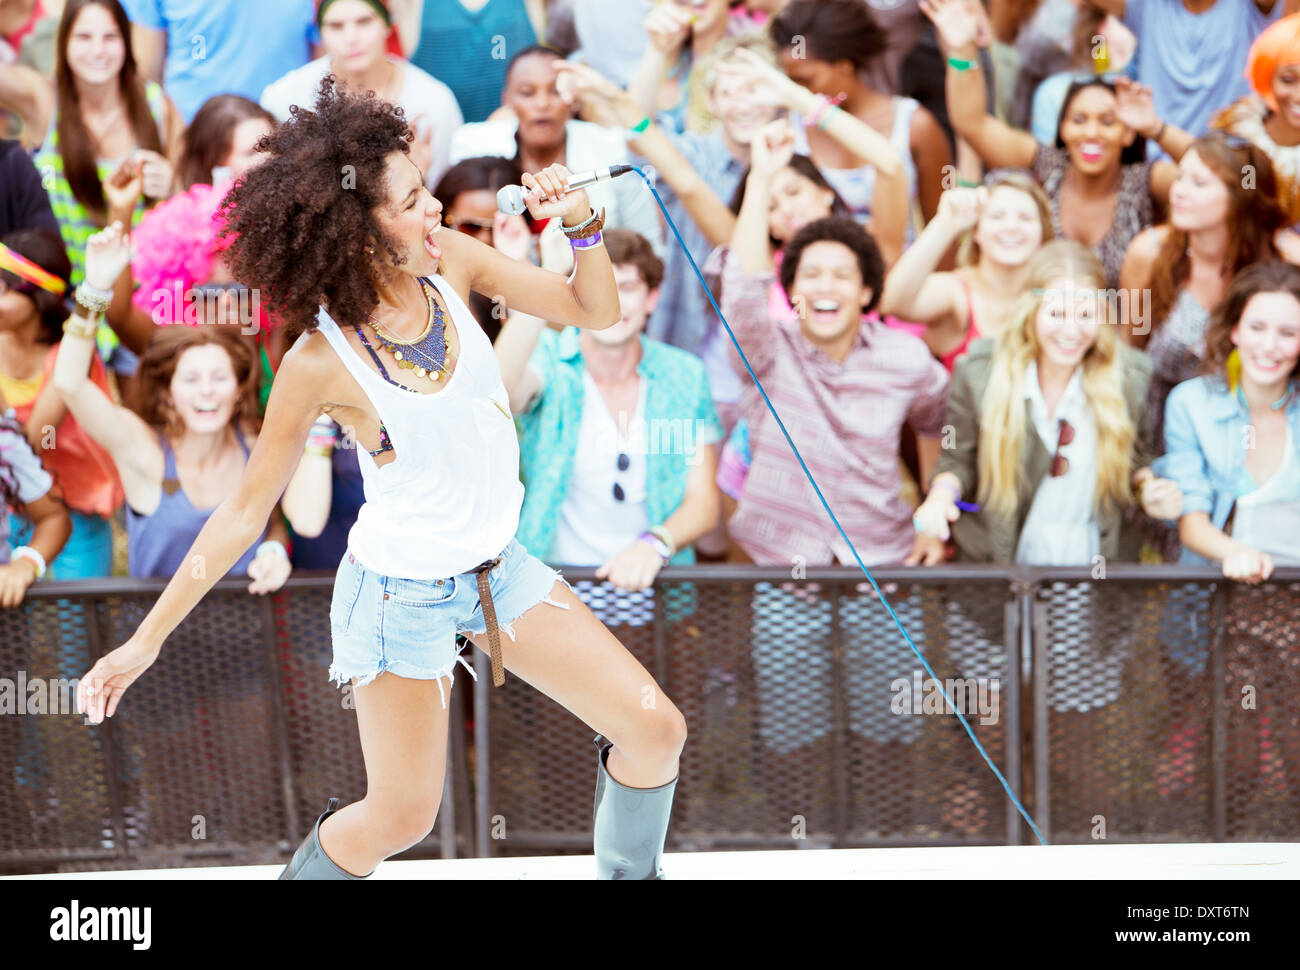 Fans cheering for performer singing on stage at music festival Stock Photo